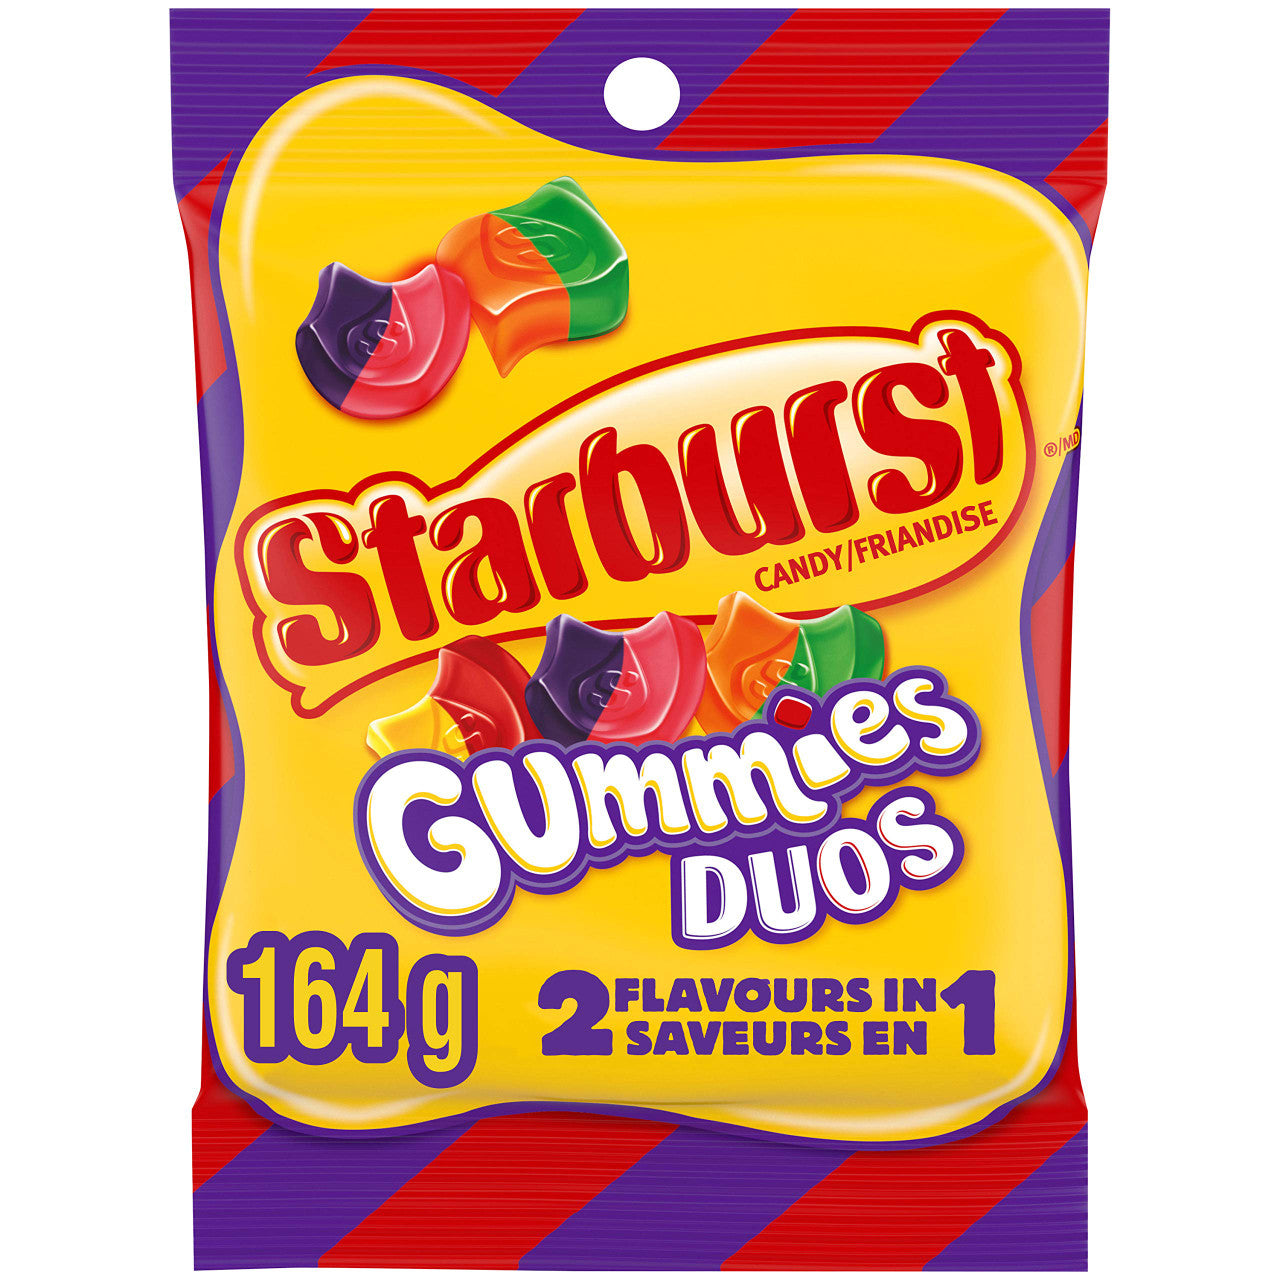 Starburst Duos Gummies Candies, Fruit Flavoured, Bag,164g/5.8oz, (Imported from Canada)